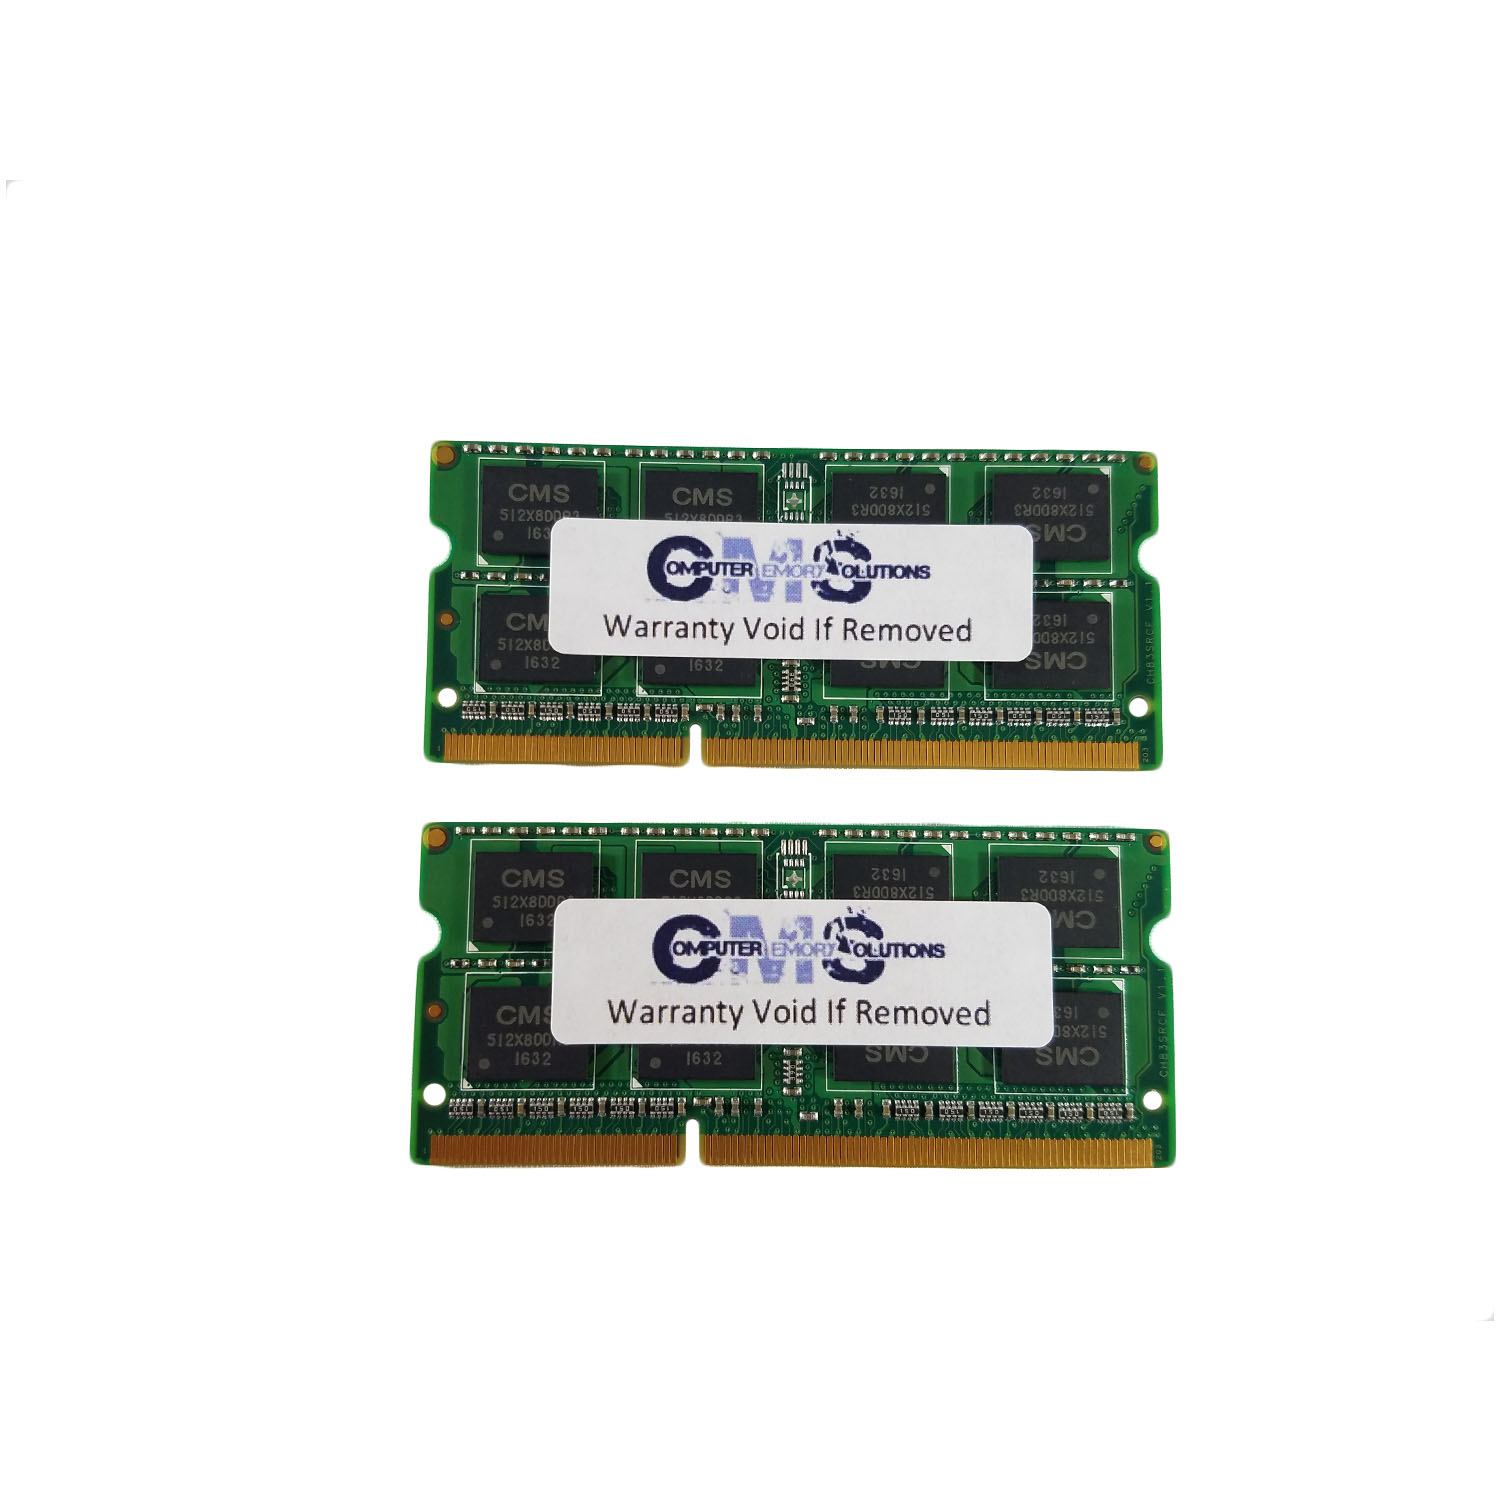 CMS 8GB (2X4GB) DDR3 8500 1066MHZ NON ECC SODIMM Memory Ram Upgrade Compatible with Apple® Imac "Core 2 Duo" 3.06 21.5-Inch (Late 2009) - A35 - image 1 of 2